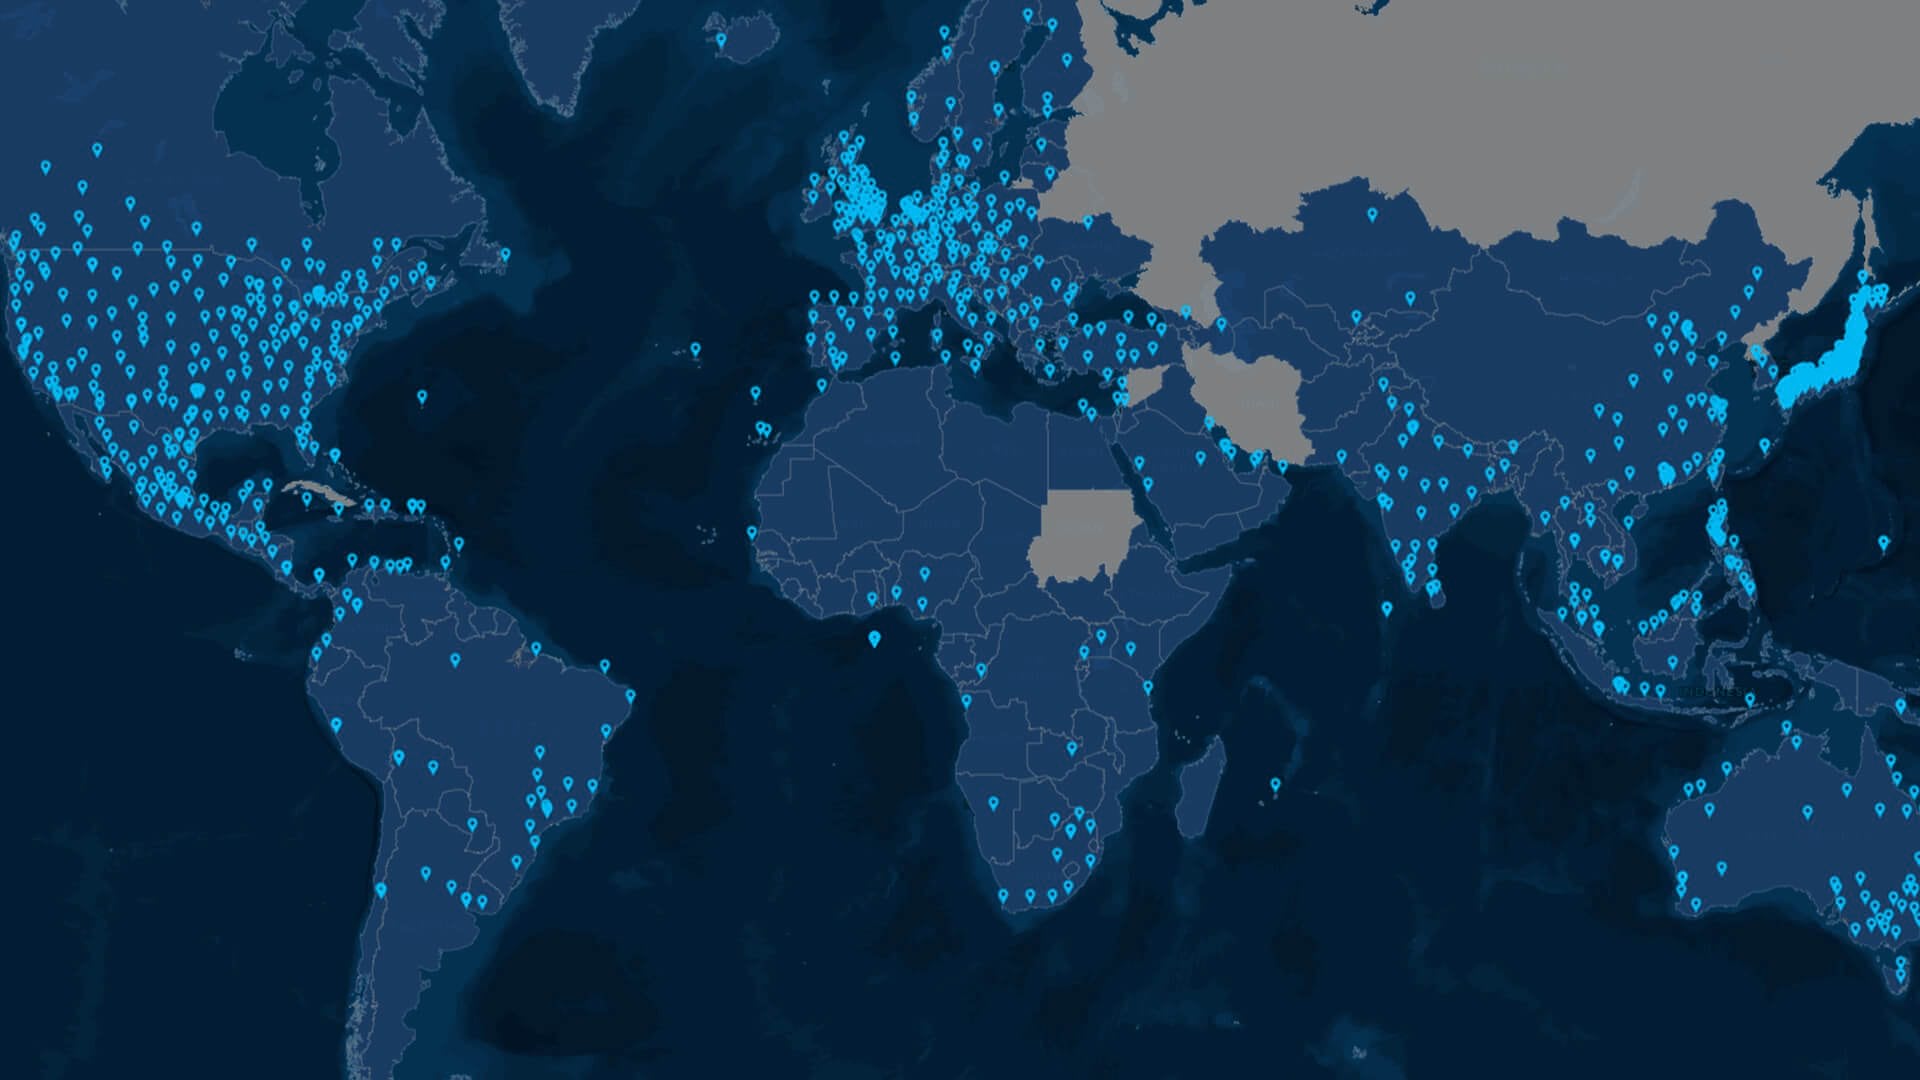 A world map shows the extensive reach of Cisco's service supply chain